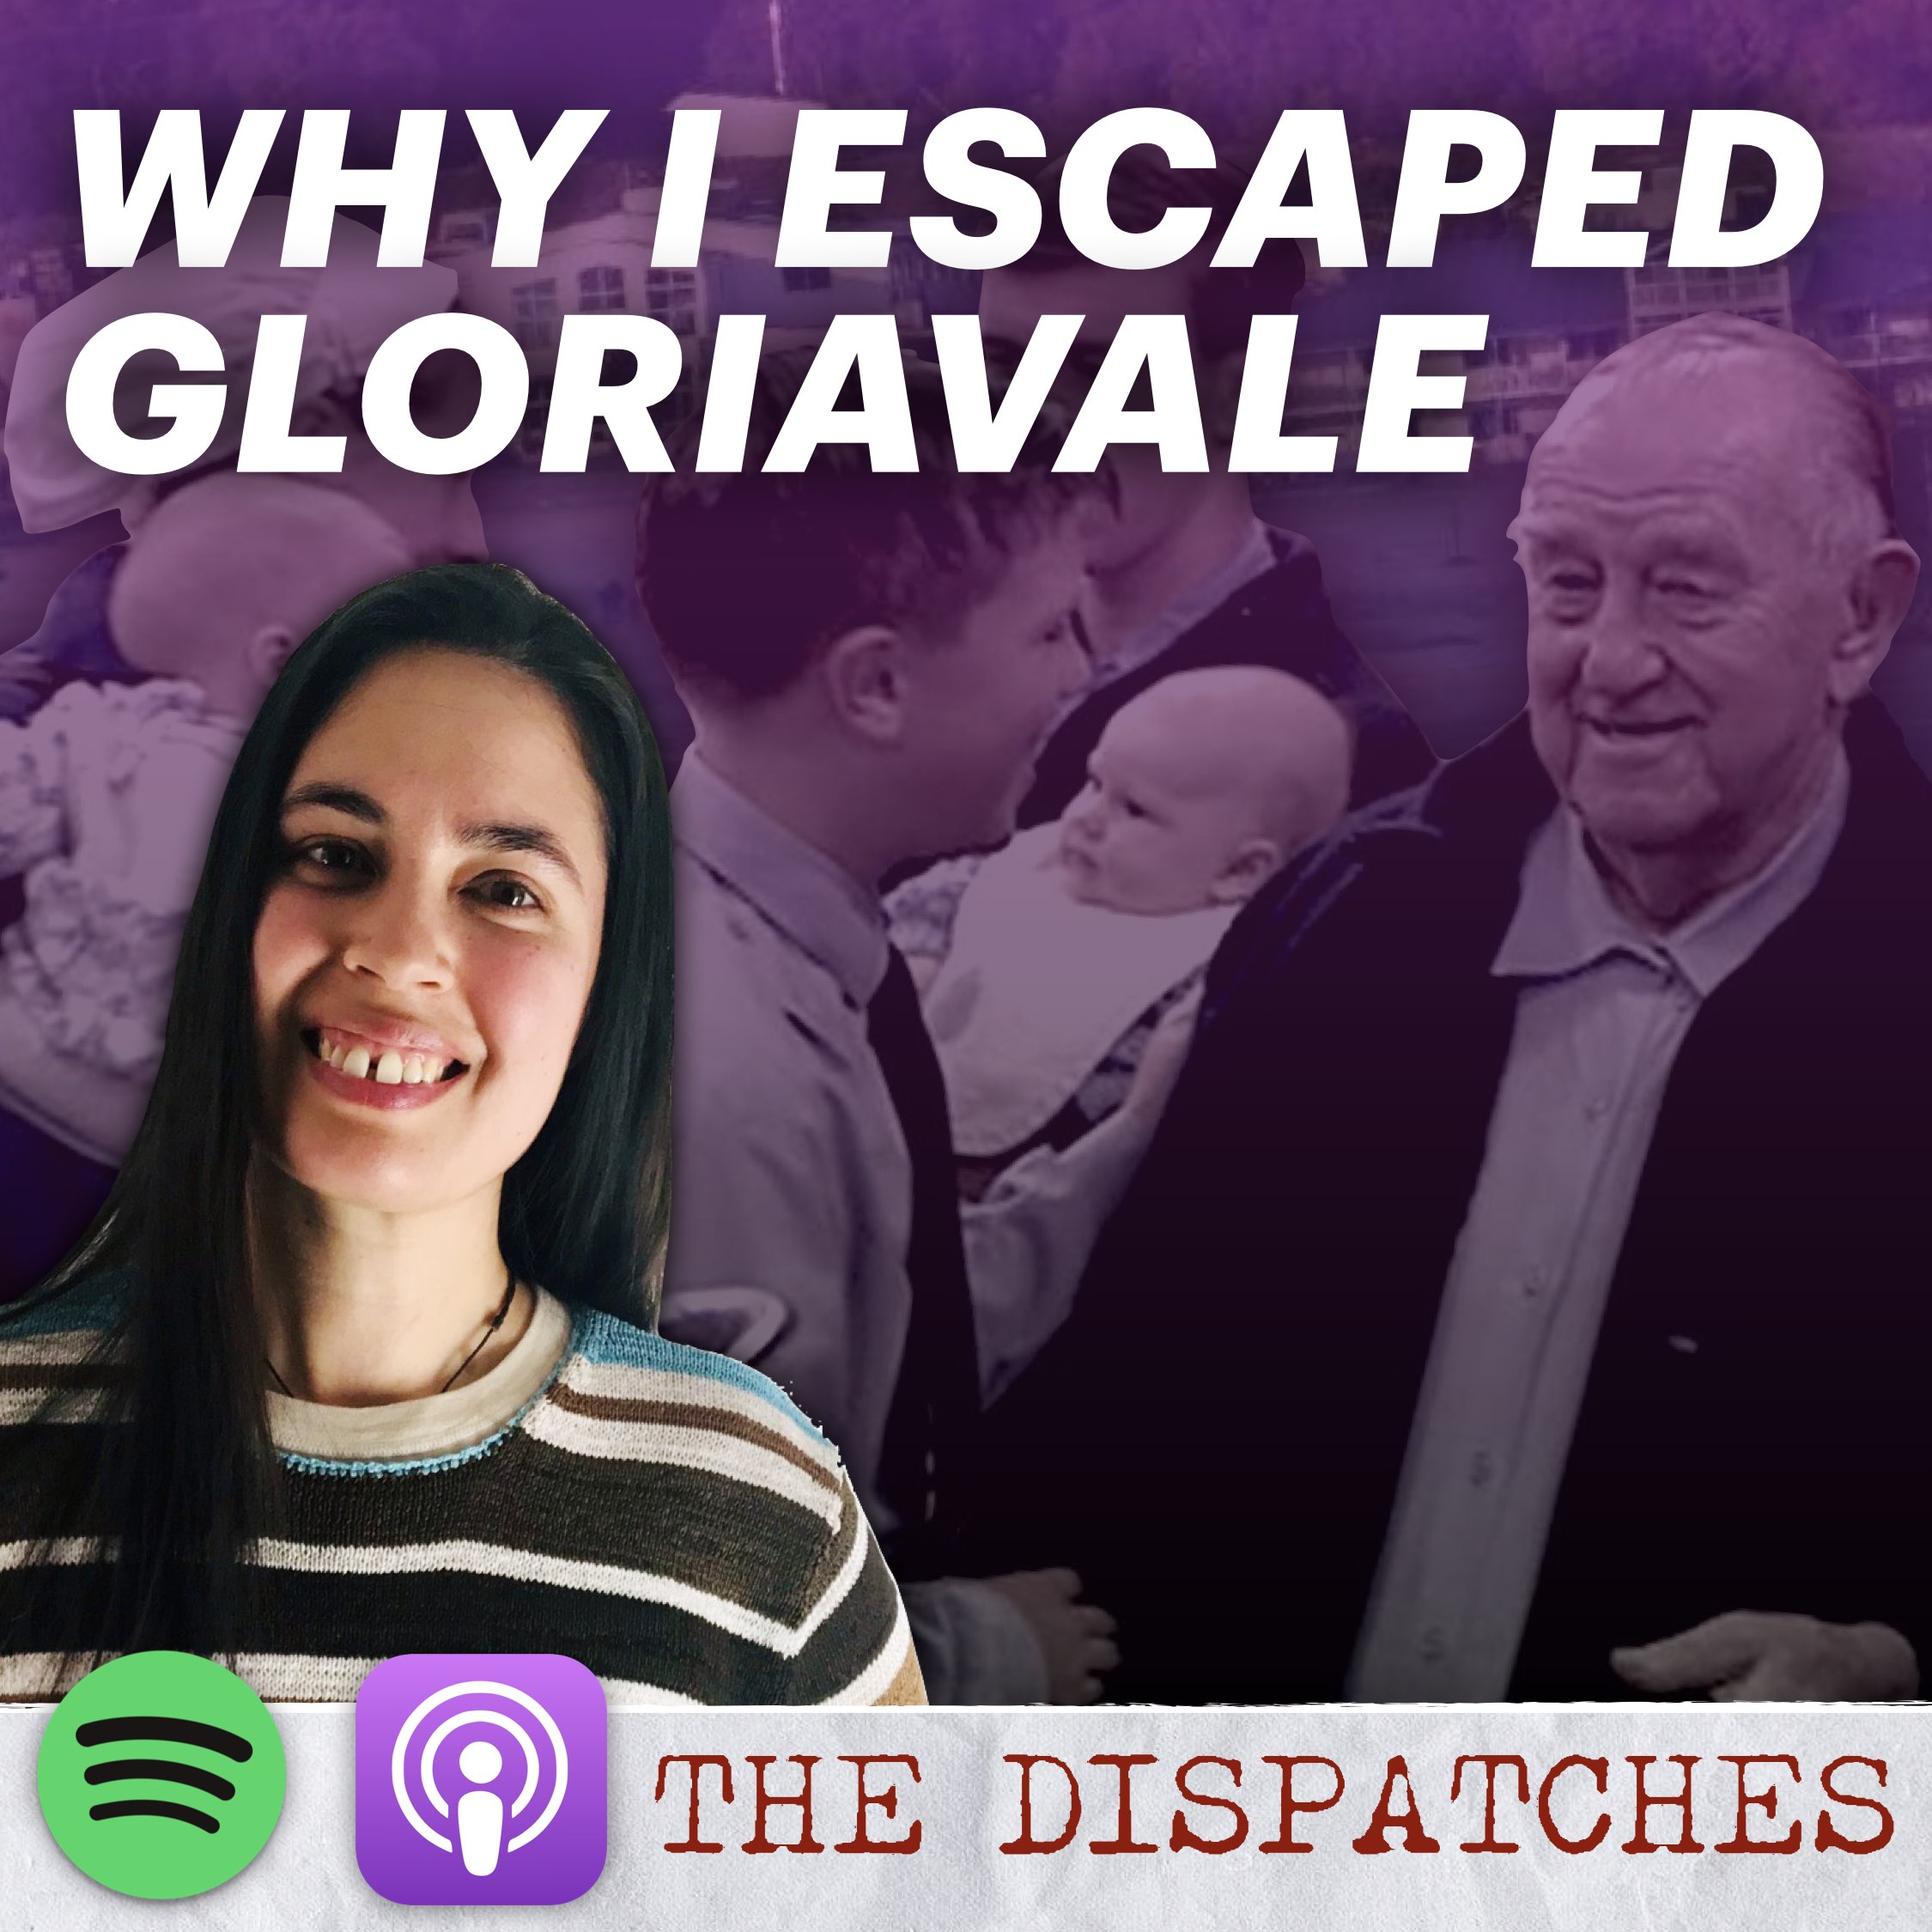 Escaping the Gloriavale Commune - The Story of Melody Pilgrim